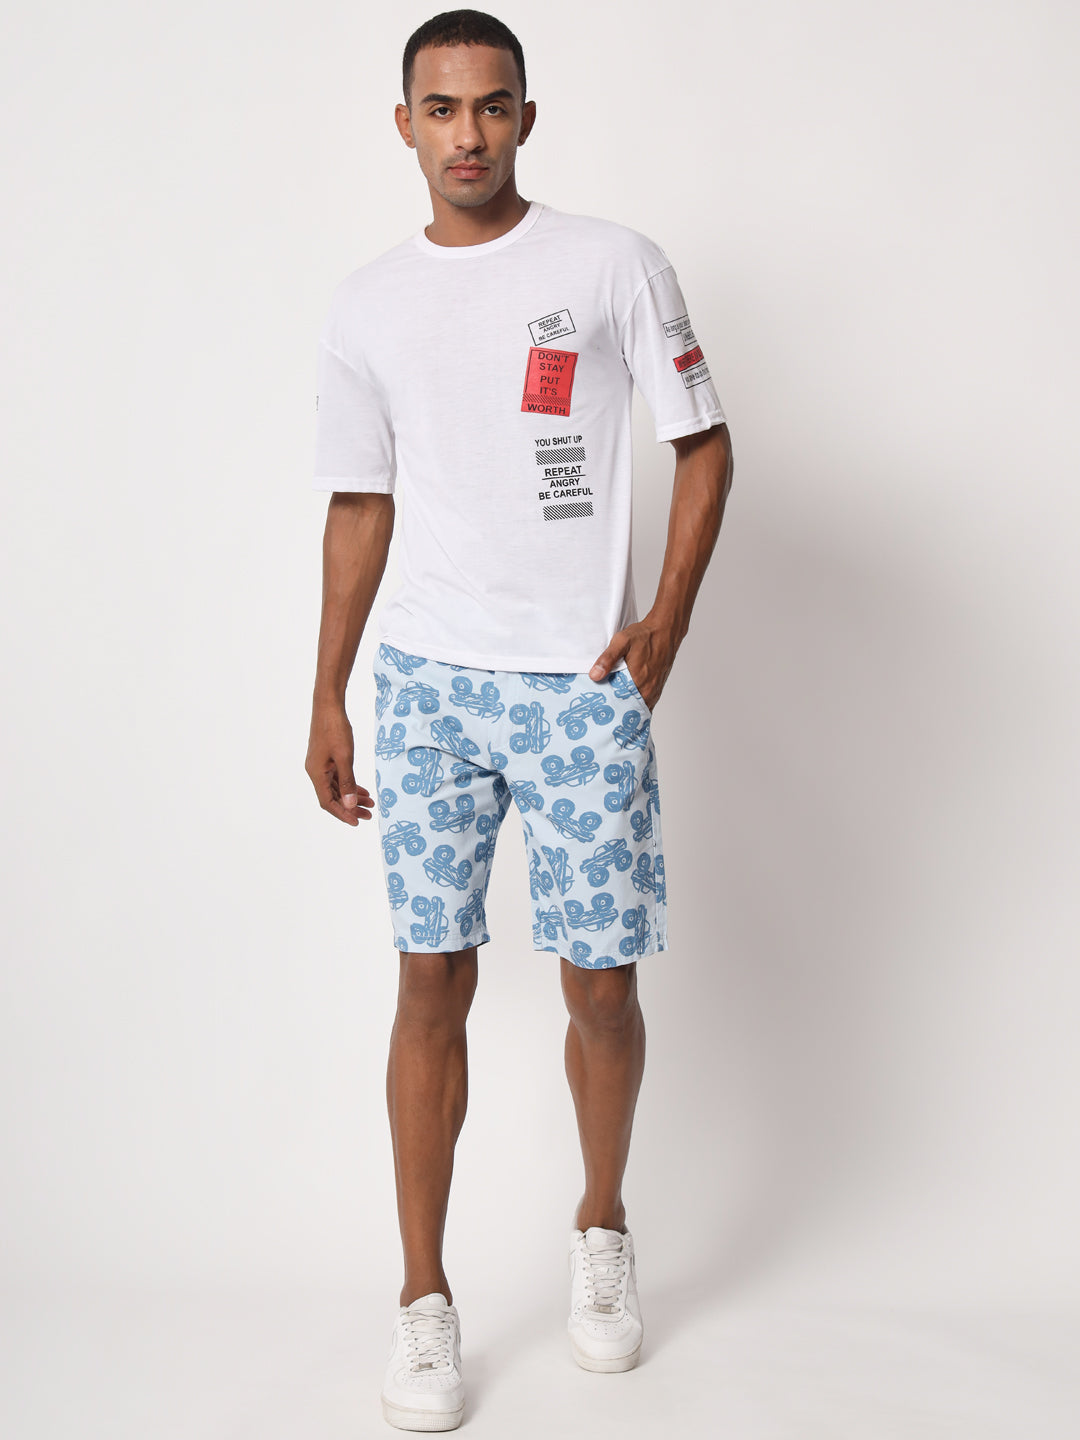 Printed Truck Blue Shorts for Men